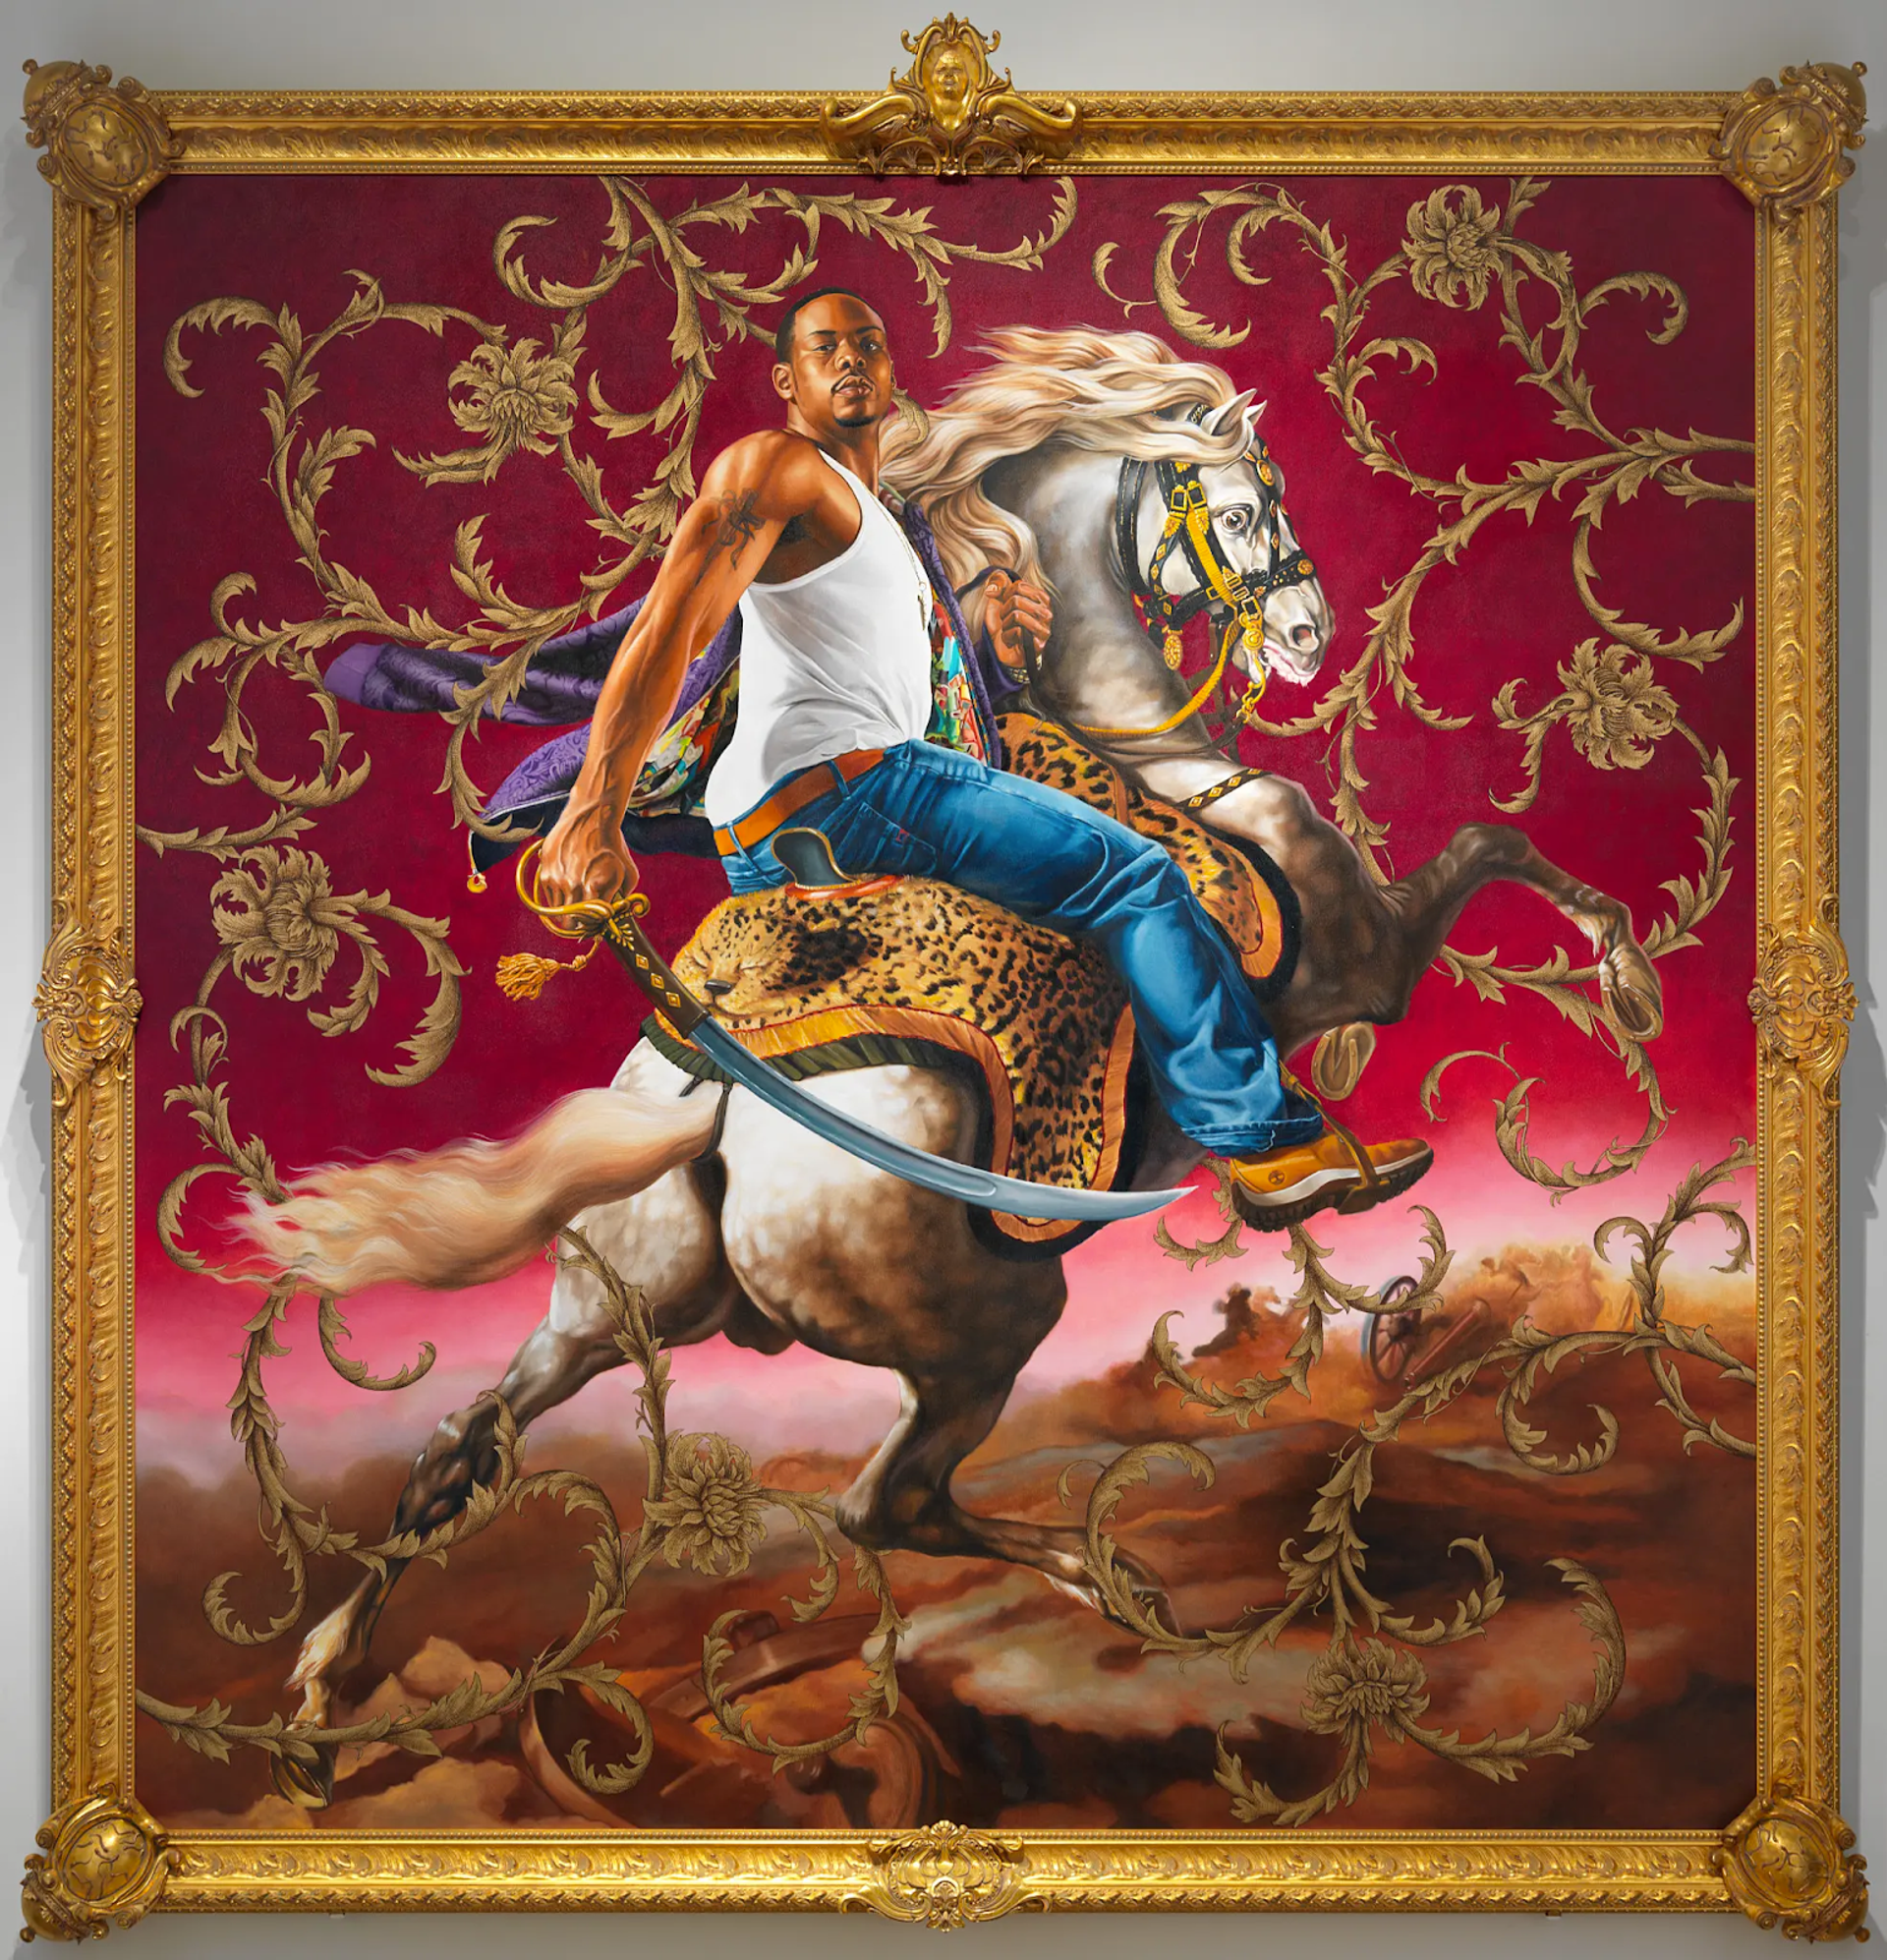 Kehinde Wiley’s The Officer Of Hussars. A figurative painting of a man riding a horse against a red elaborate background.